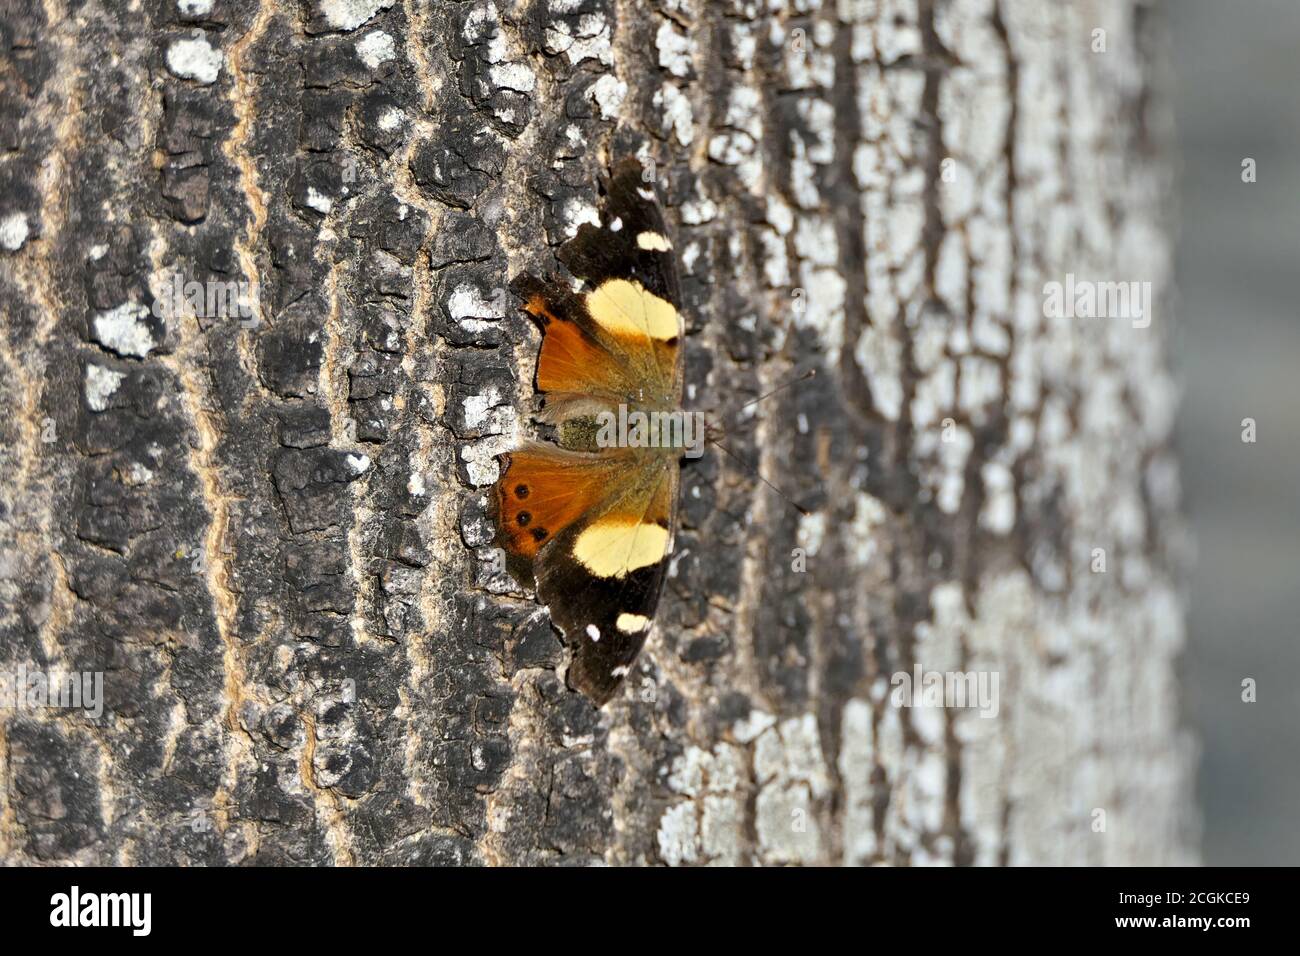 Closeup australian and new zealand butterfly called vanessa itea in natural environment outdoors on a tree bark Stock Photo